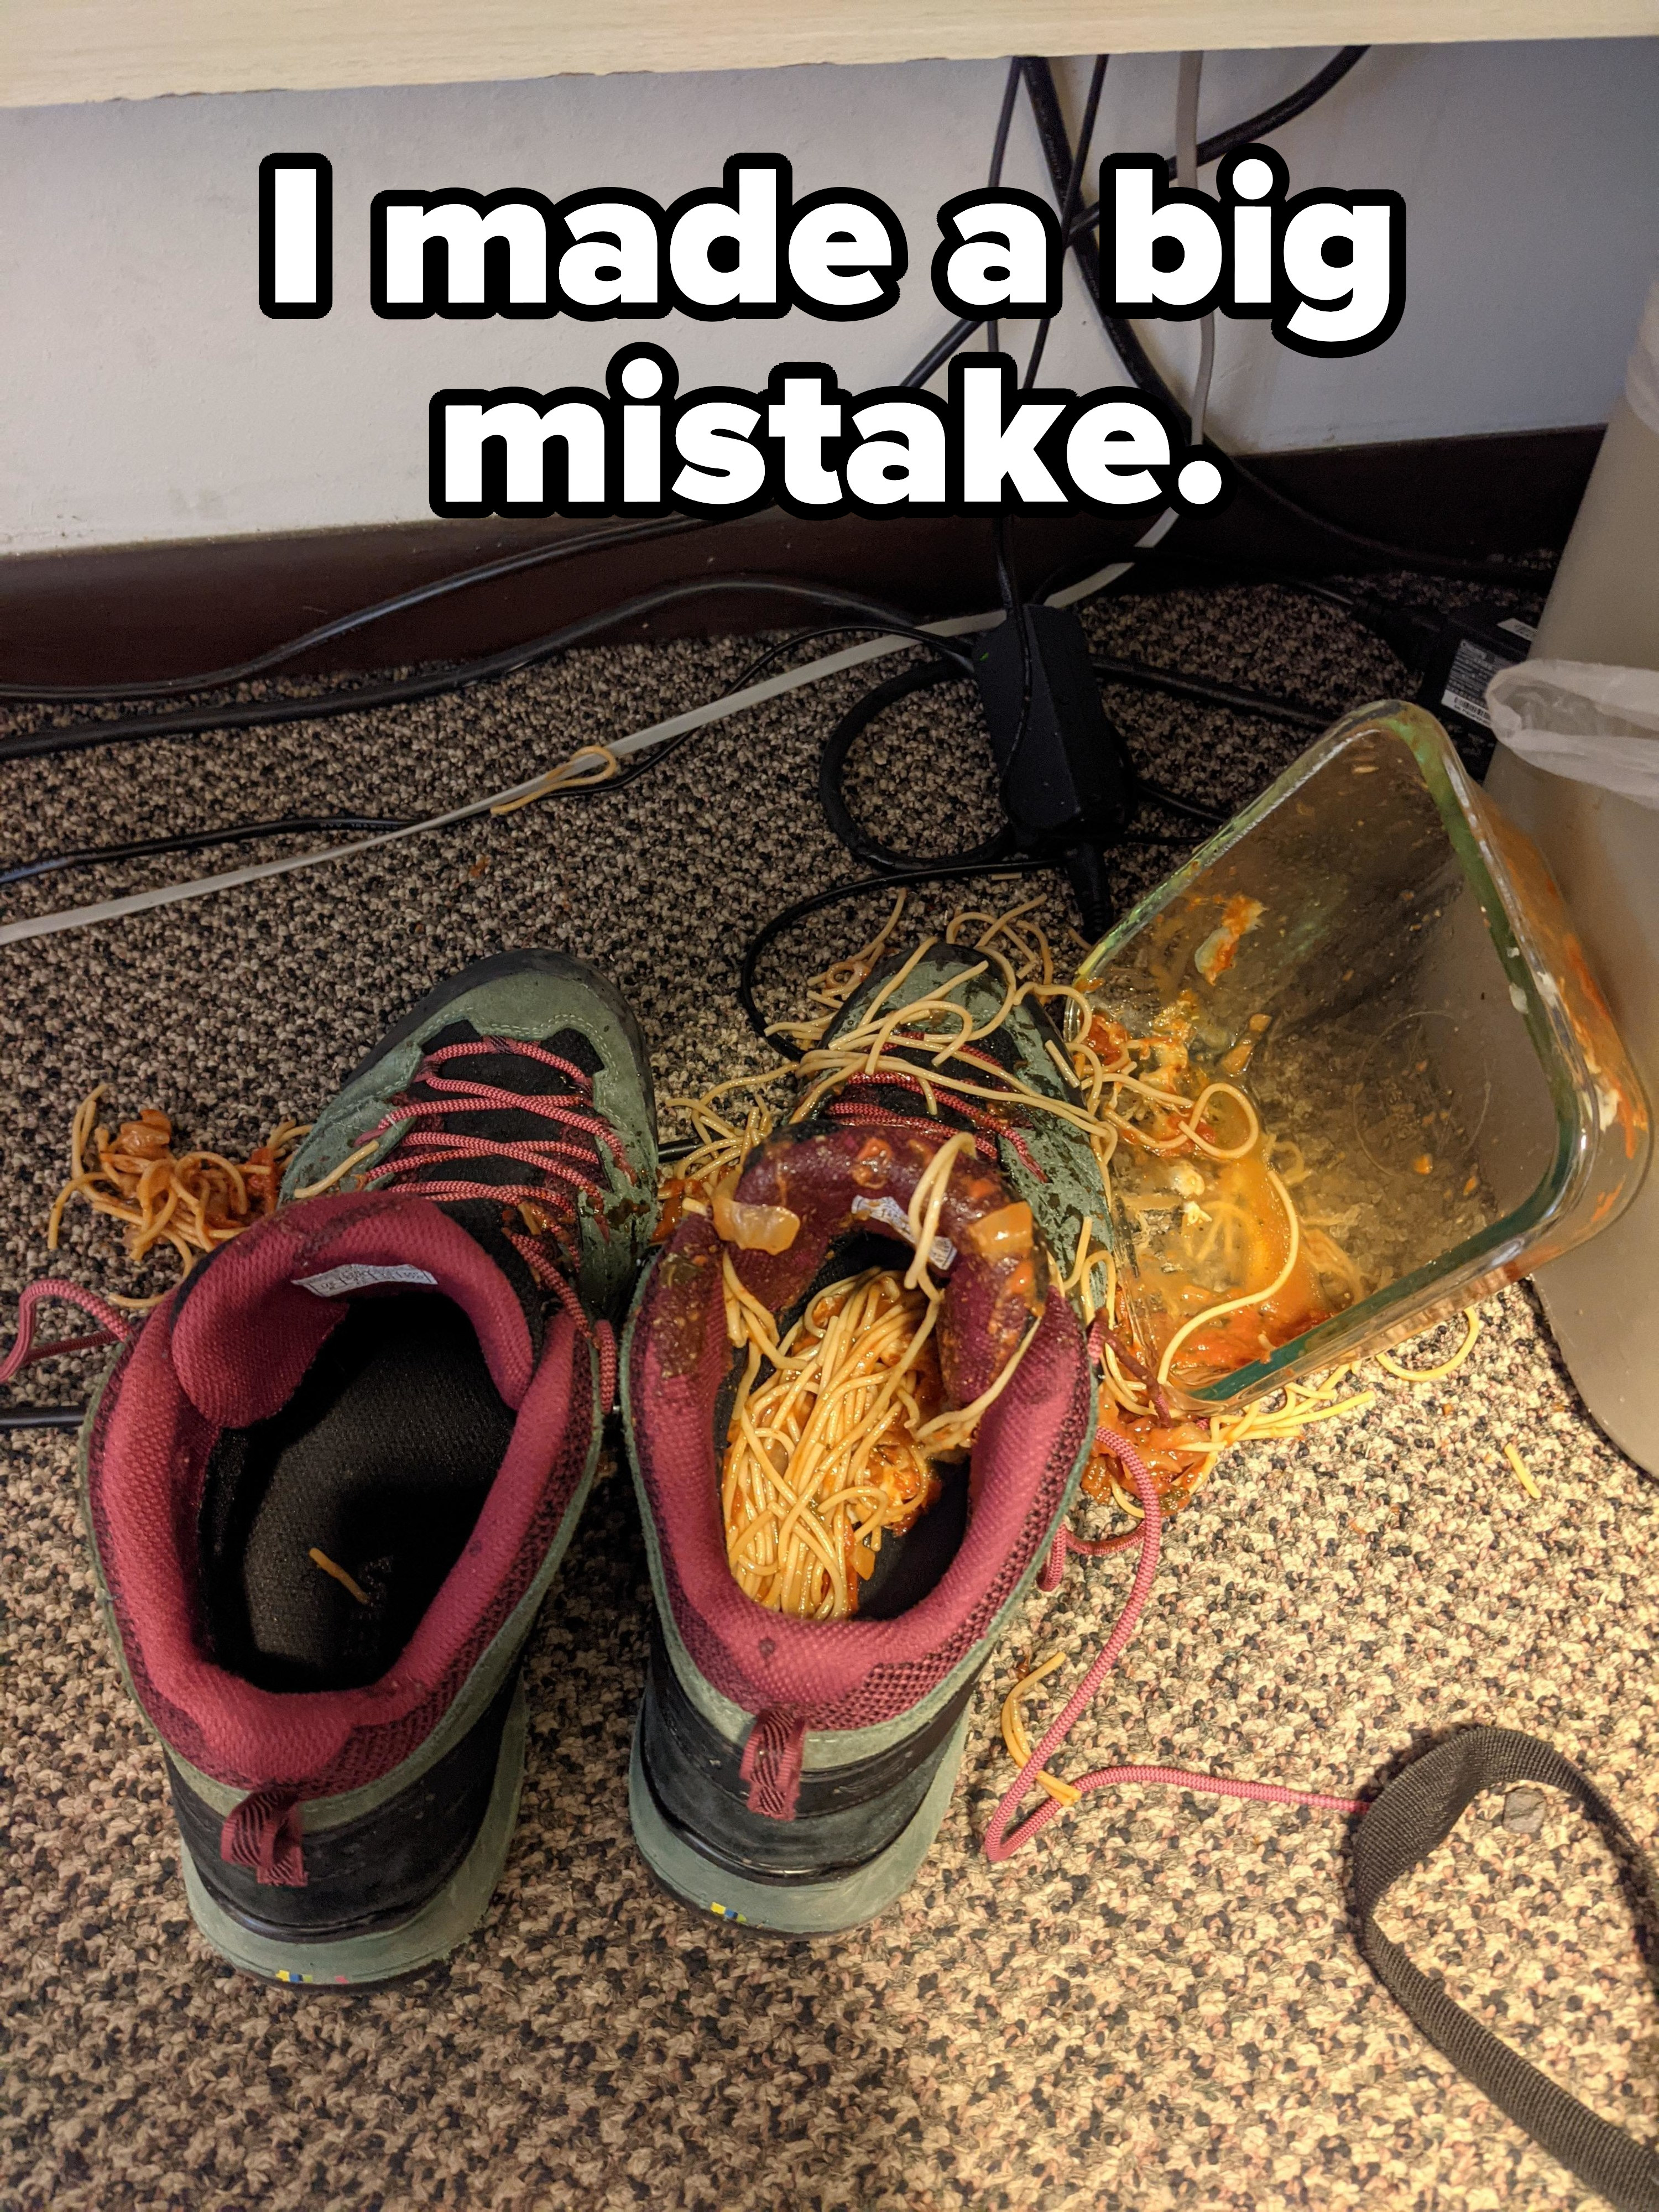 Cooked spaghetti and sauce spilled into a shoe